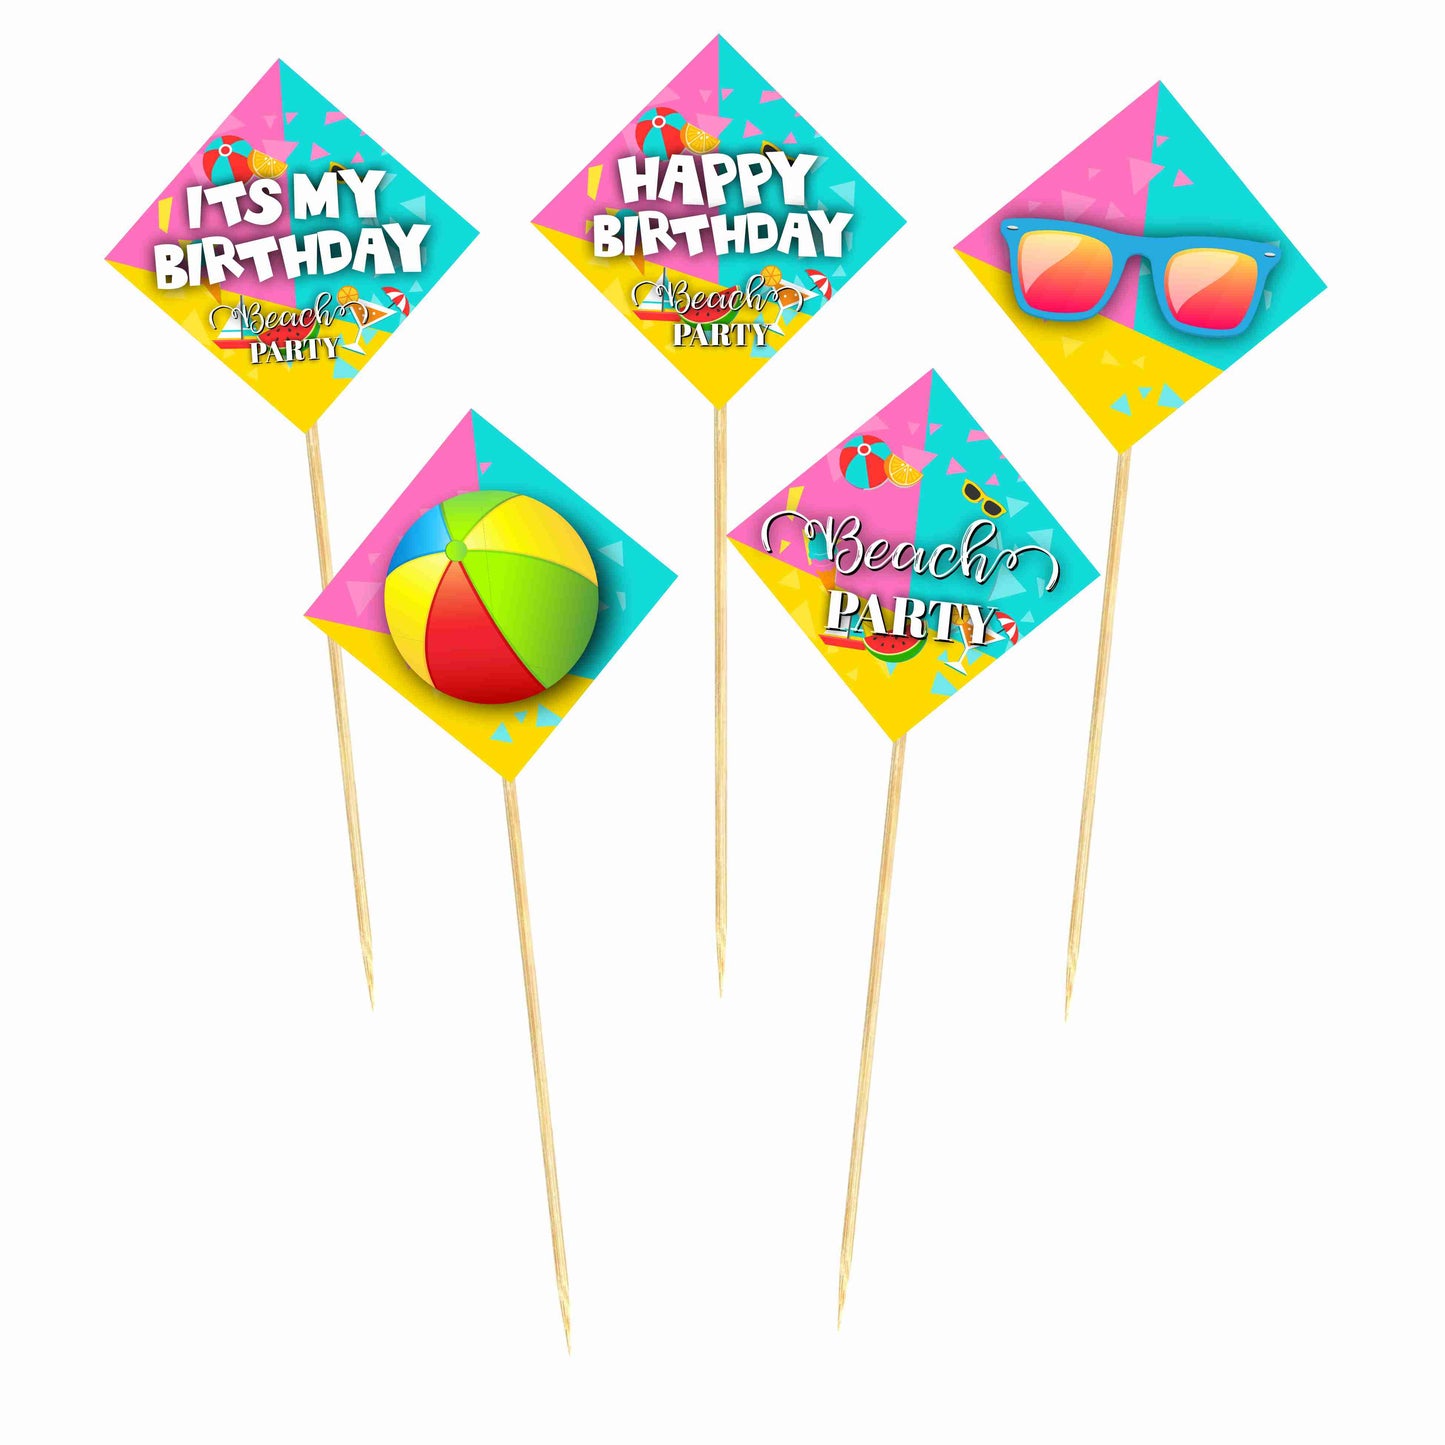 Beach Party Theme Cake Topper Pack of 10 Nos for Birthday Cake Decoration Theme Party Item For Boys Girls Adults Birthday Theme Decor